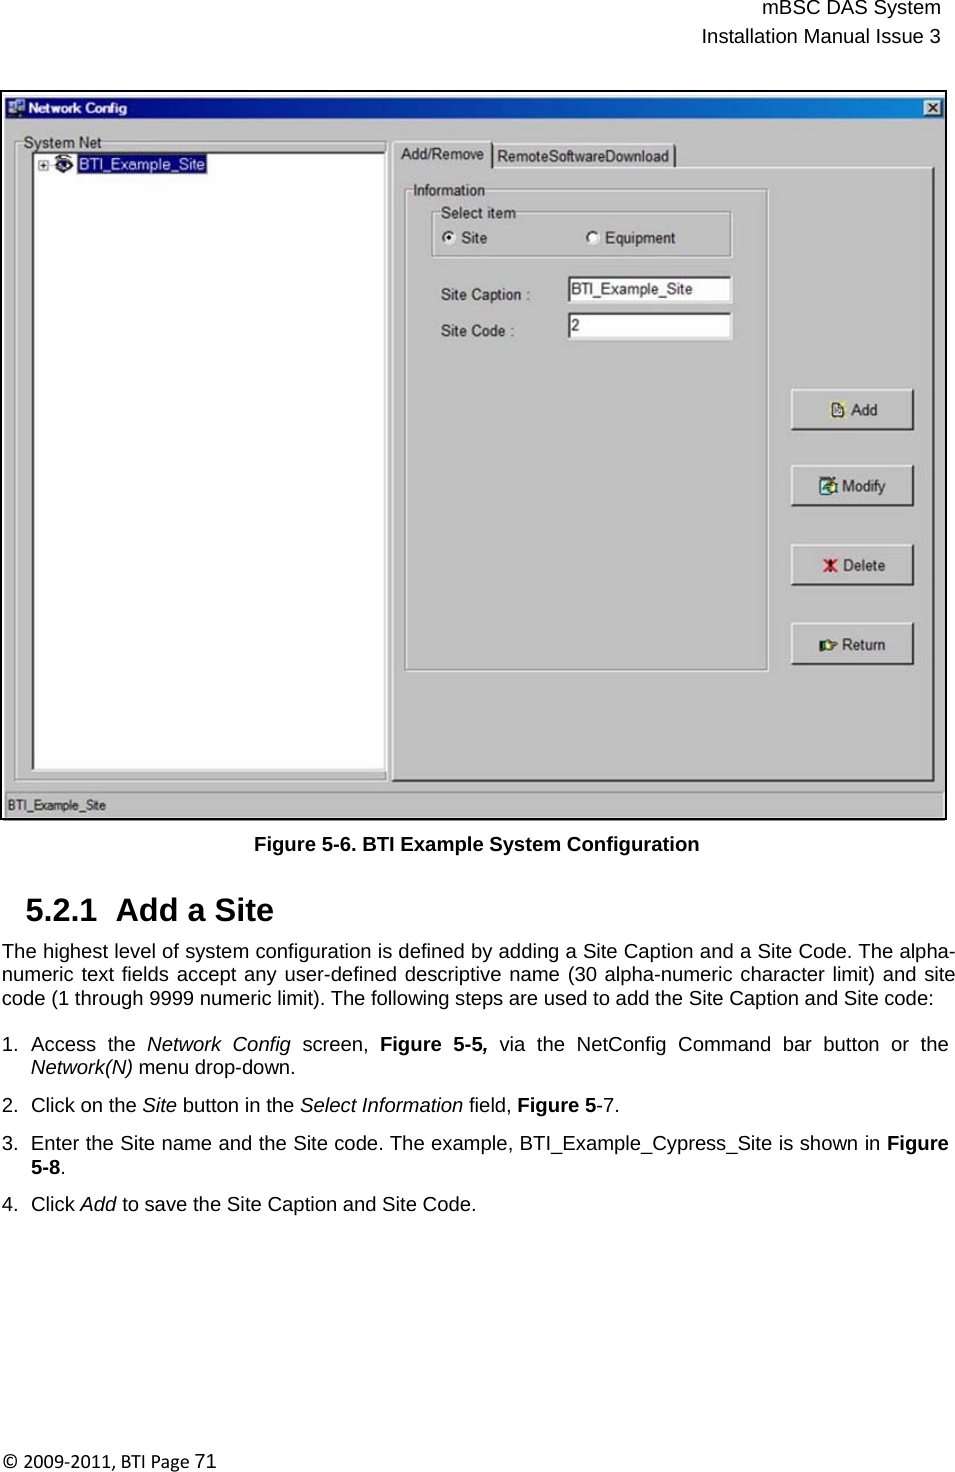 mBSC DAS SystemInstallation Manual Issue 3©2009‐2011,BTIPage71                                       Figure 5-6. BTI Example System Configuration   5.2.1  Add a Site  The highest level of system configuration is defined by adding a Site Caption and a Site Code. The alpha- numeric text fields accept any user-defined descriptive name (30 alpha-numeric character limit) and site code (1 through 9999 numeric limit). The following steps are used to add the Site Caption and Site code:  1.  Access  the  Network  Config  screen,  Figure  5-5,  via  the  NetConfig  Command  bar  button  or  the Network(N) menu drop-down.  2.  Click on the Site button in the Select Information field, Figure 5-7.  3.  Enter the Site name and the Site code. The example, BTI_Example_Cypress_Site is shown in Figure 5-8.  4.  Click Add to save the Site Caption and Site Code. 